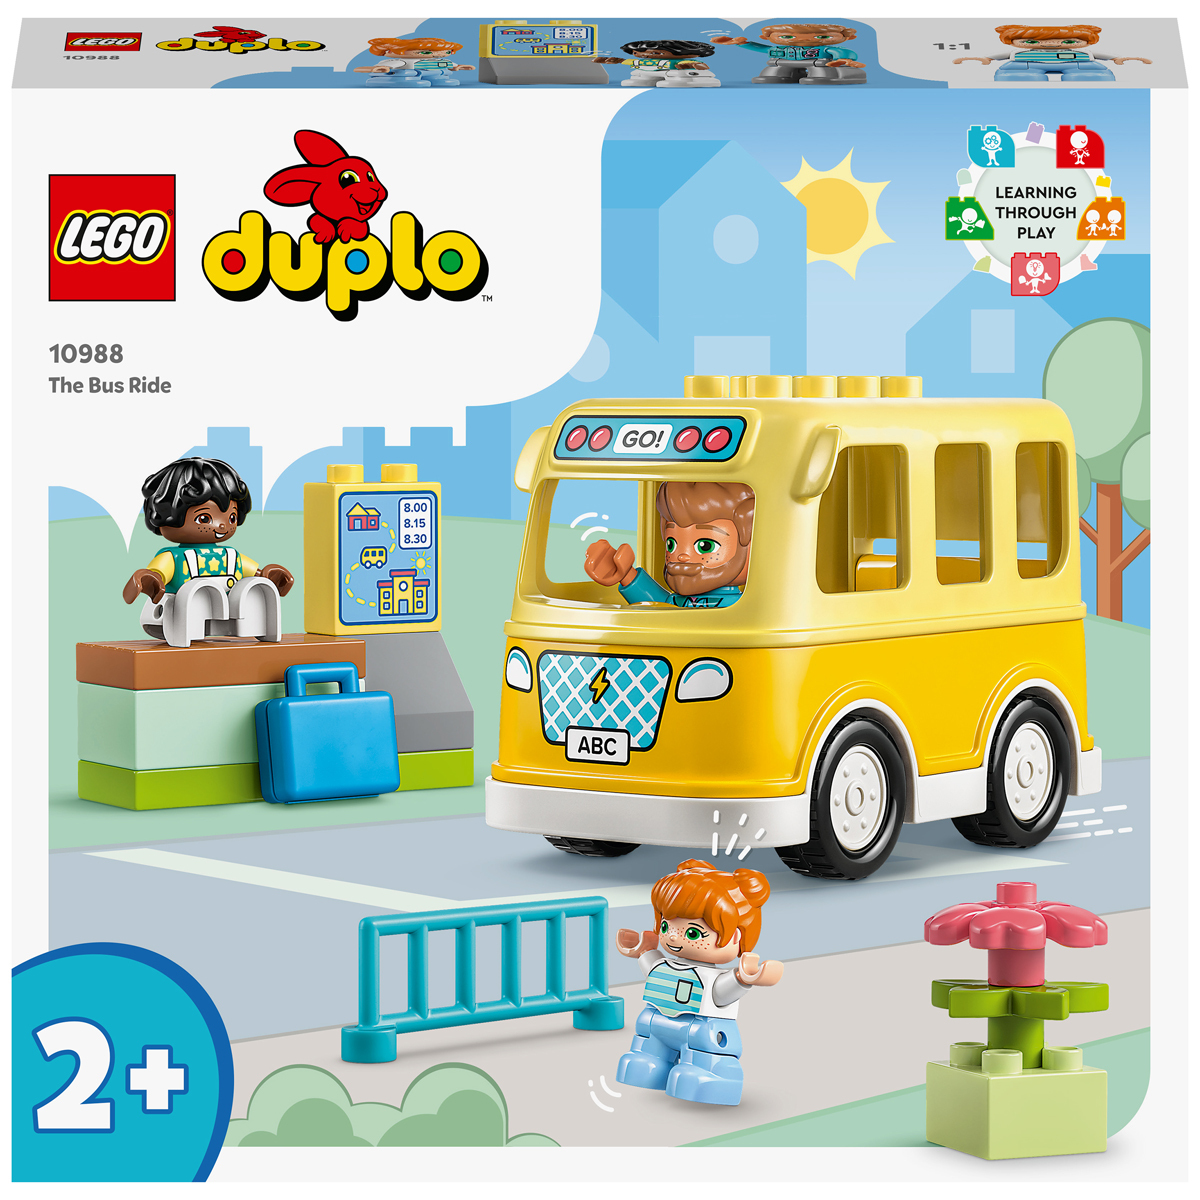 LEGO DUPLO The Bus Ride Playset 10988 | Early Learning Centre